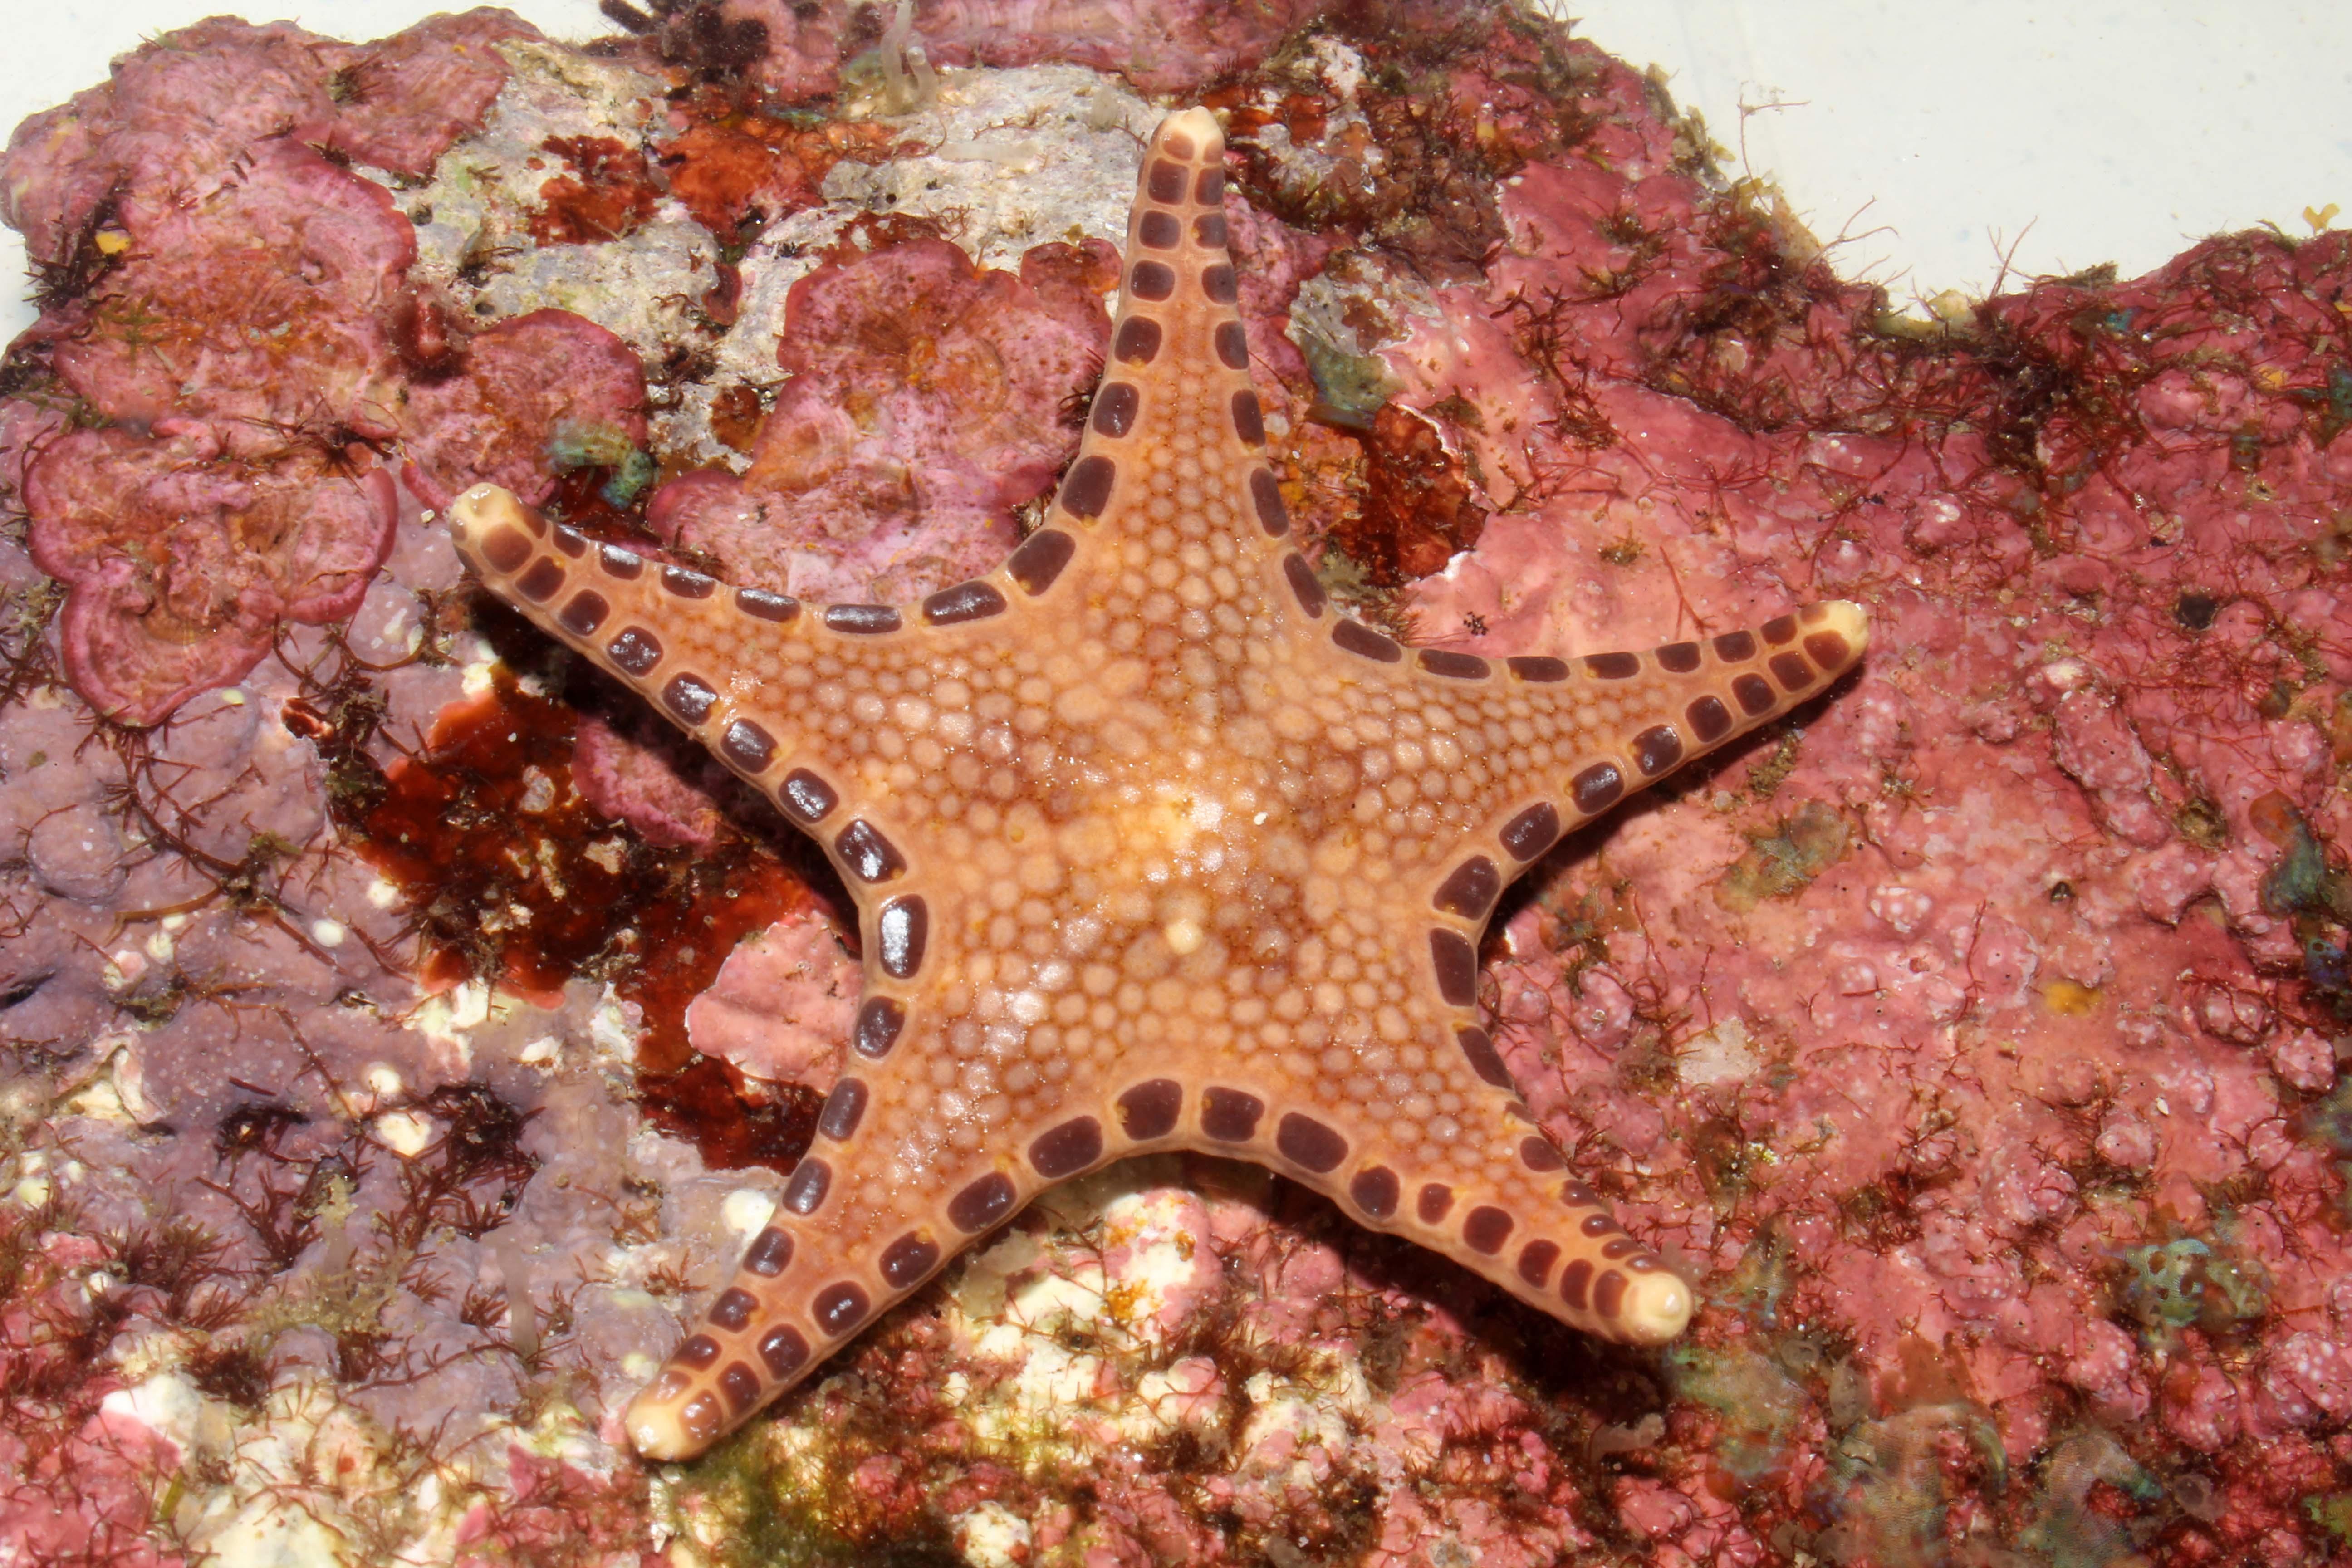  A new species of starfish, المكتشف in the Bounty Trough, has five arms and a unique spotted pattern.